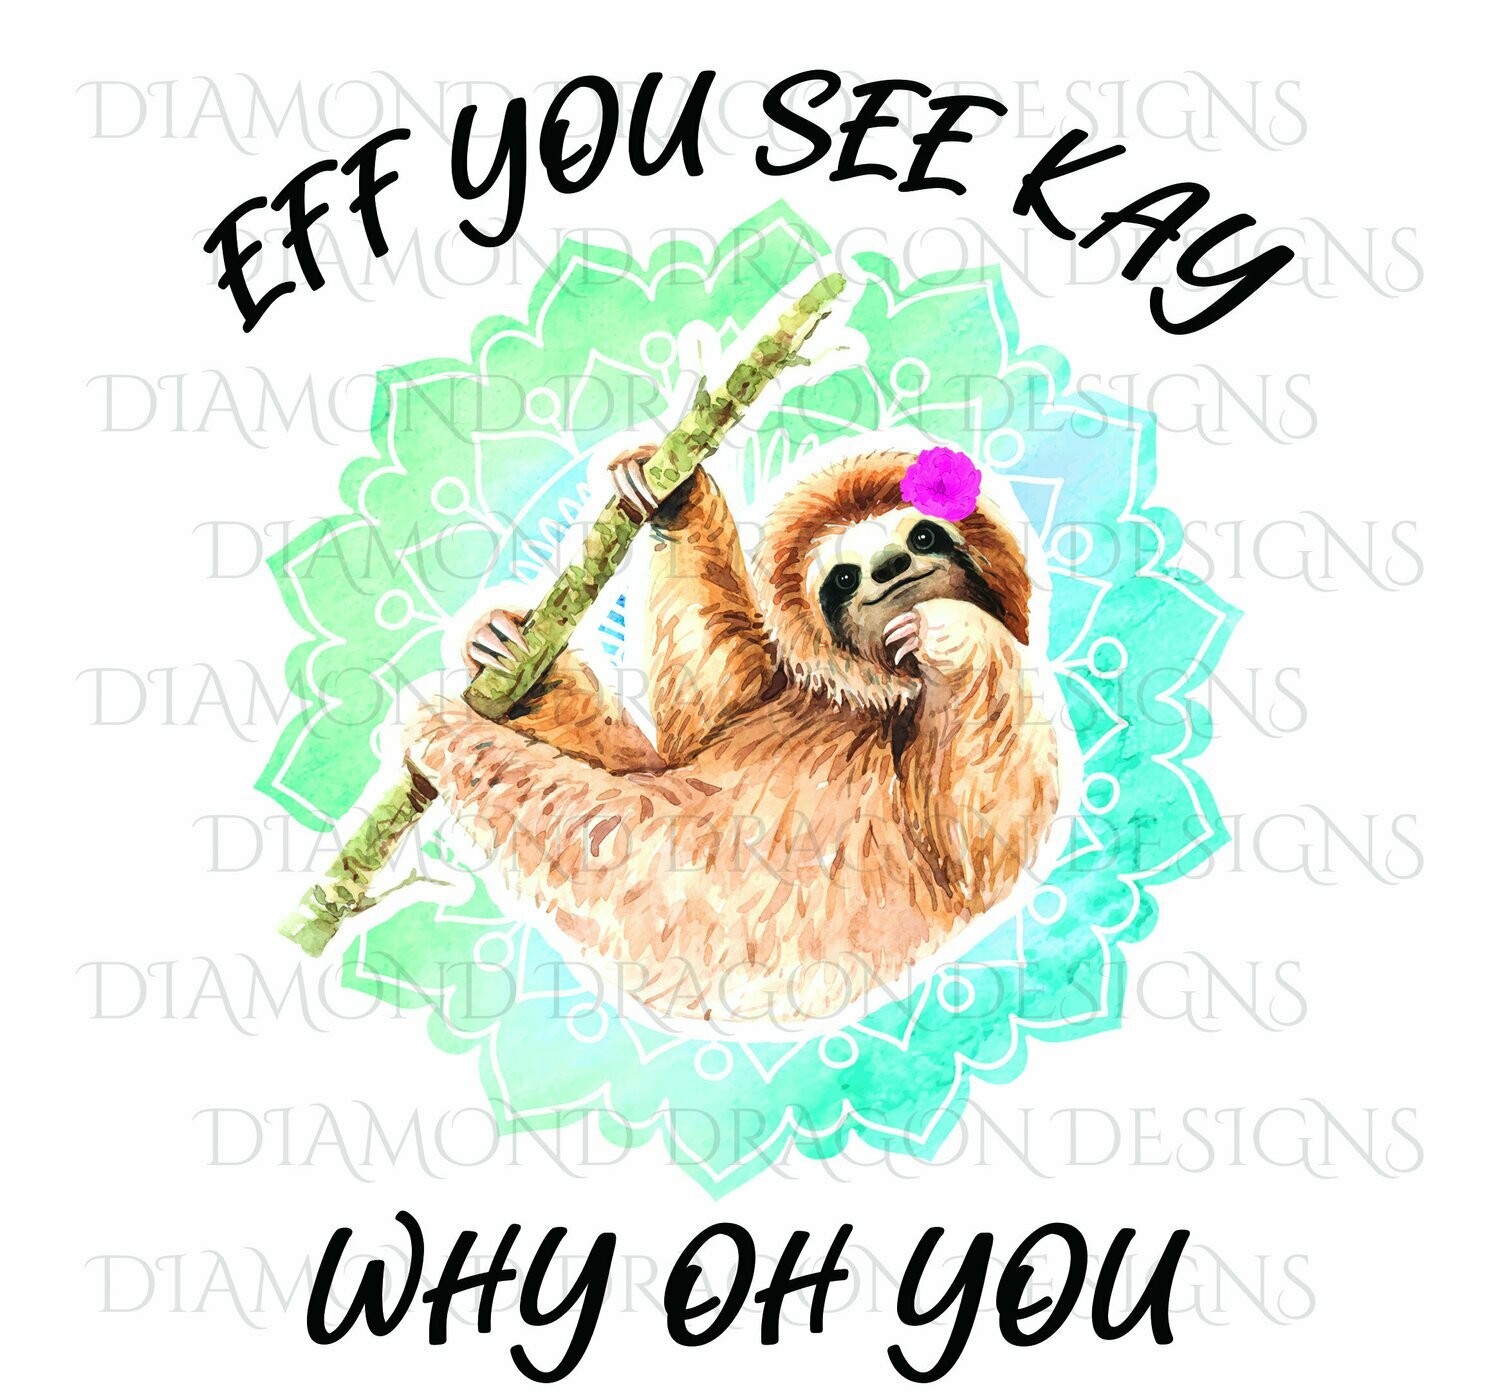 Animals - Cute Sloth, Sloth with Flower, Eff You See Kay, Why Oh You, Watercolor Sloth, Waterslide